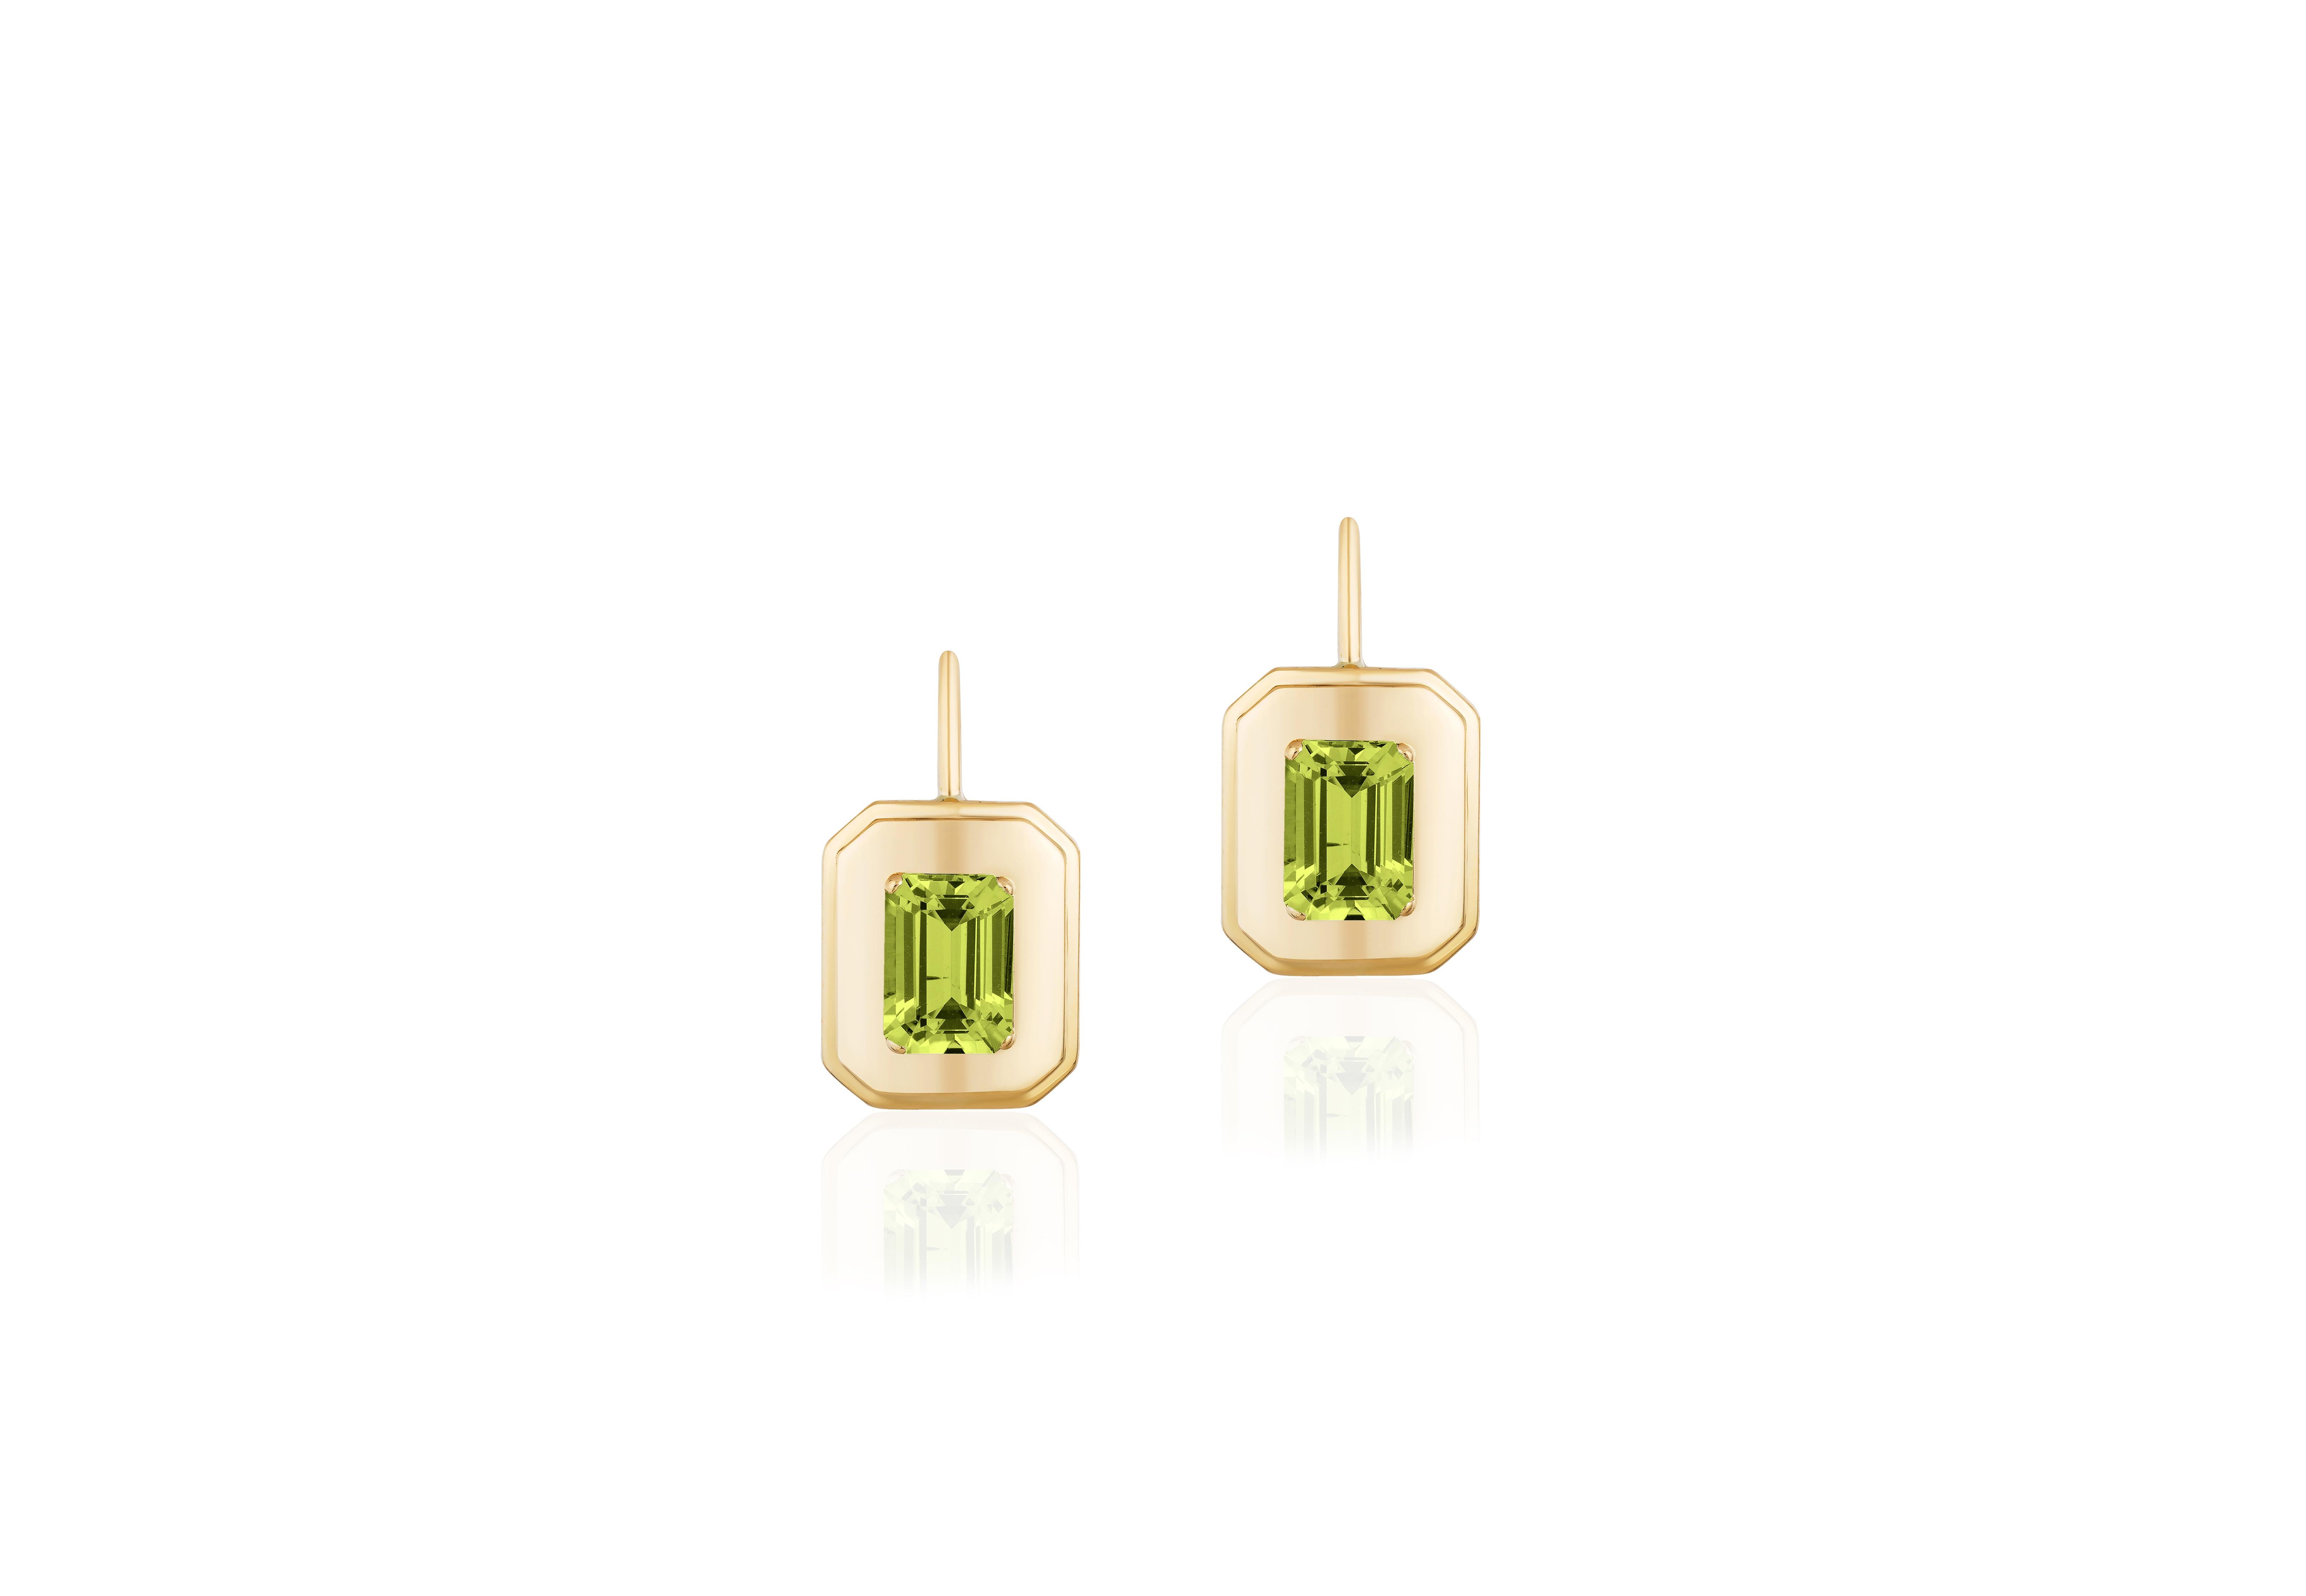 These unique earrings are a Peridot Emerald Cut, with Lever back. From our ‘Queen’ Collection, it was inspired by royalty, but with a modern twist. The combination of Gold, and Peridot represents power, richness and passion of a true Queen. The